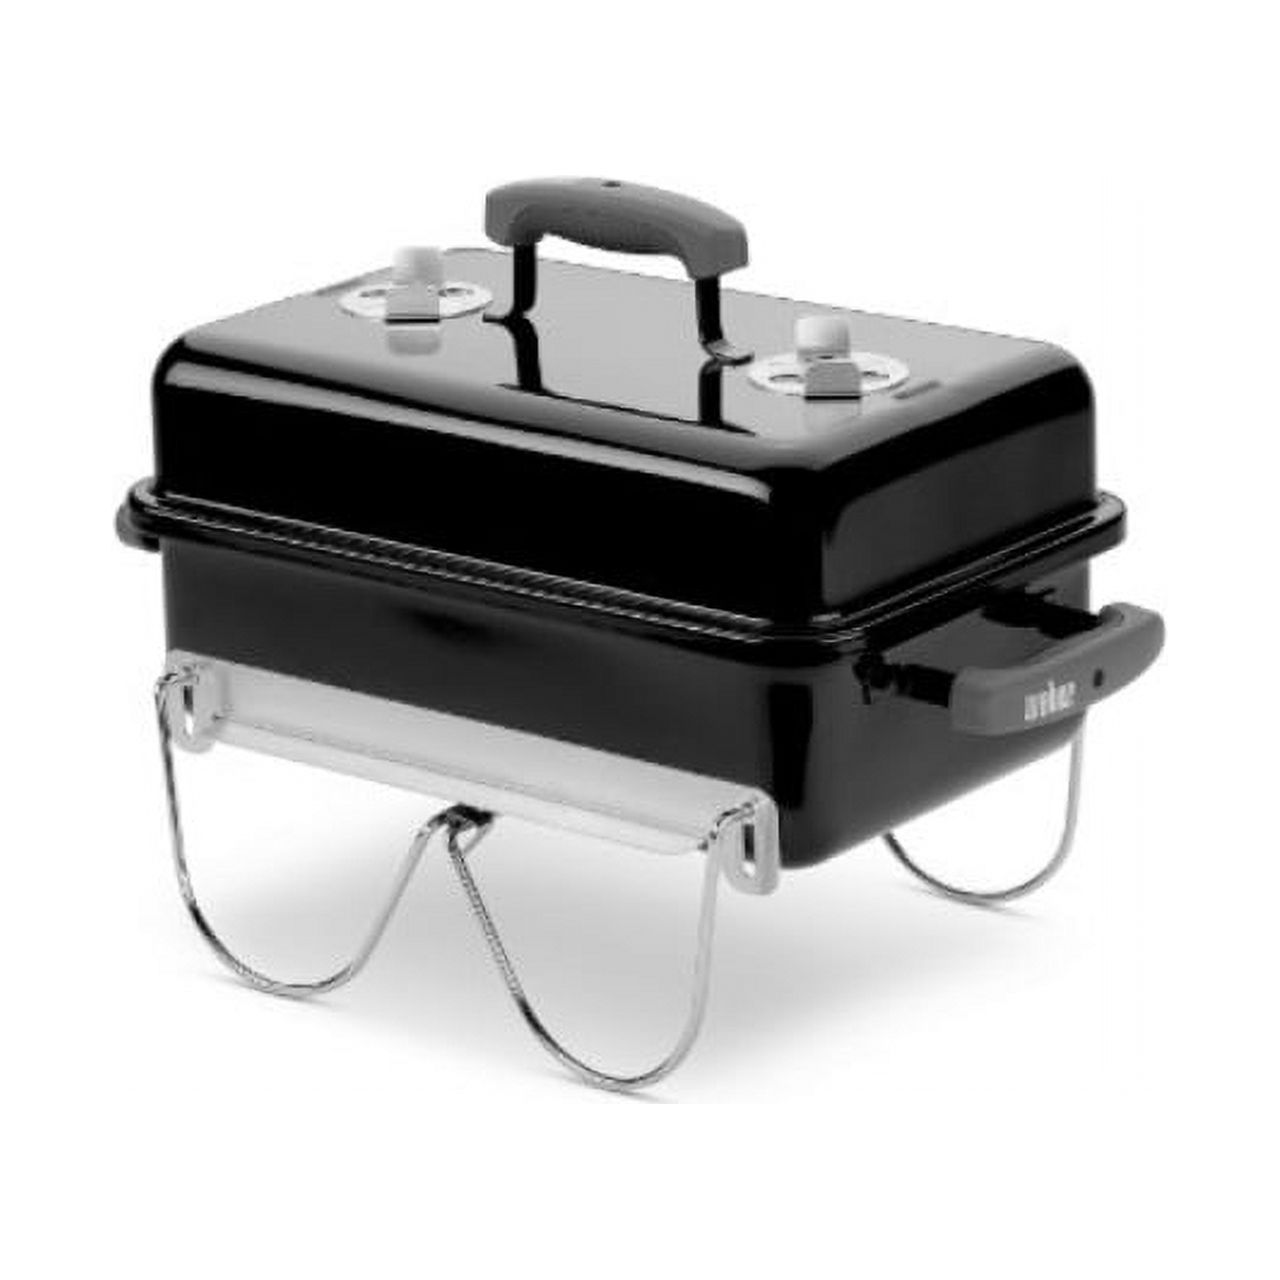 weber go-anywhere charcoal grill - image 1 of 4